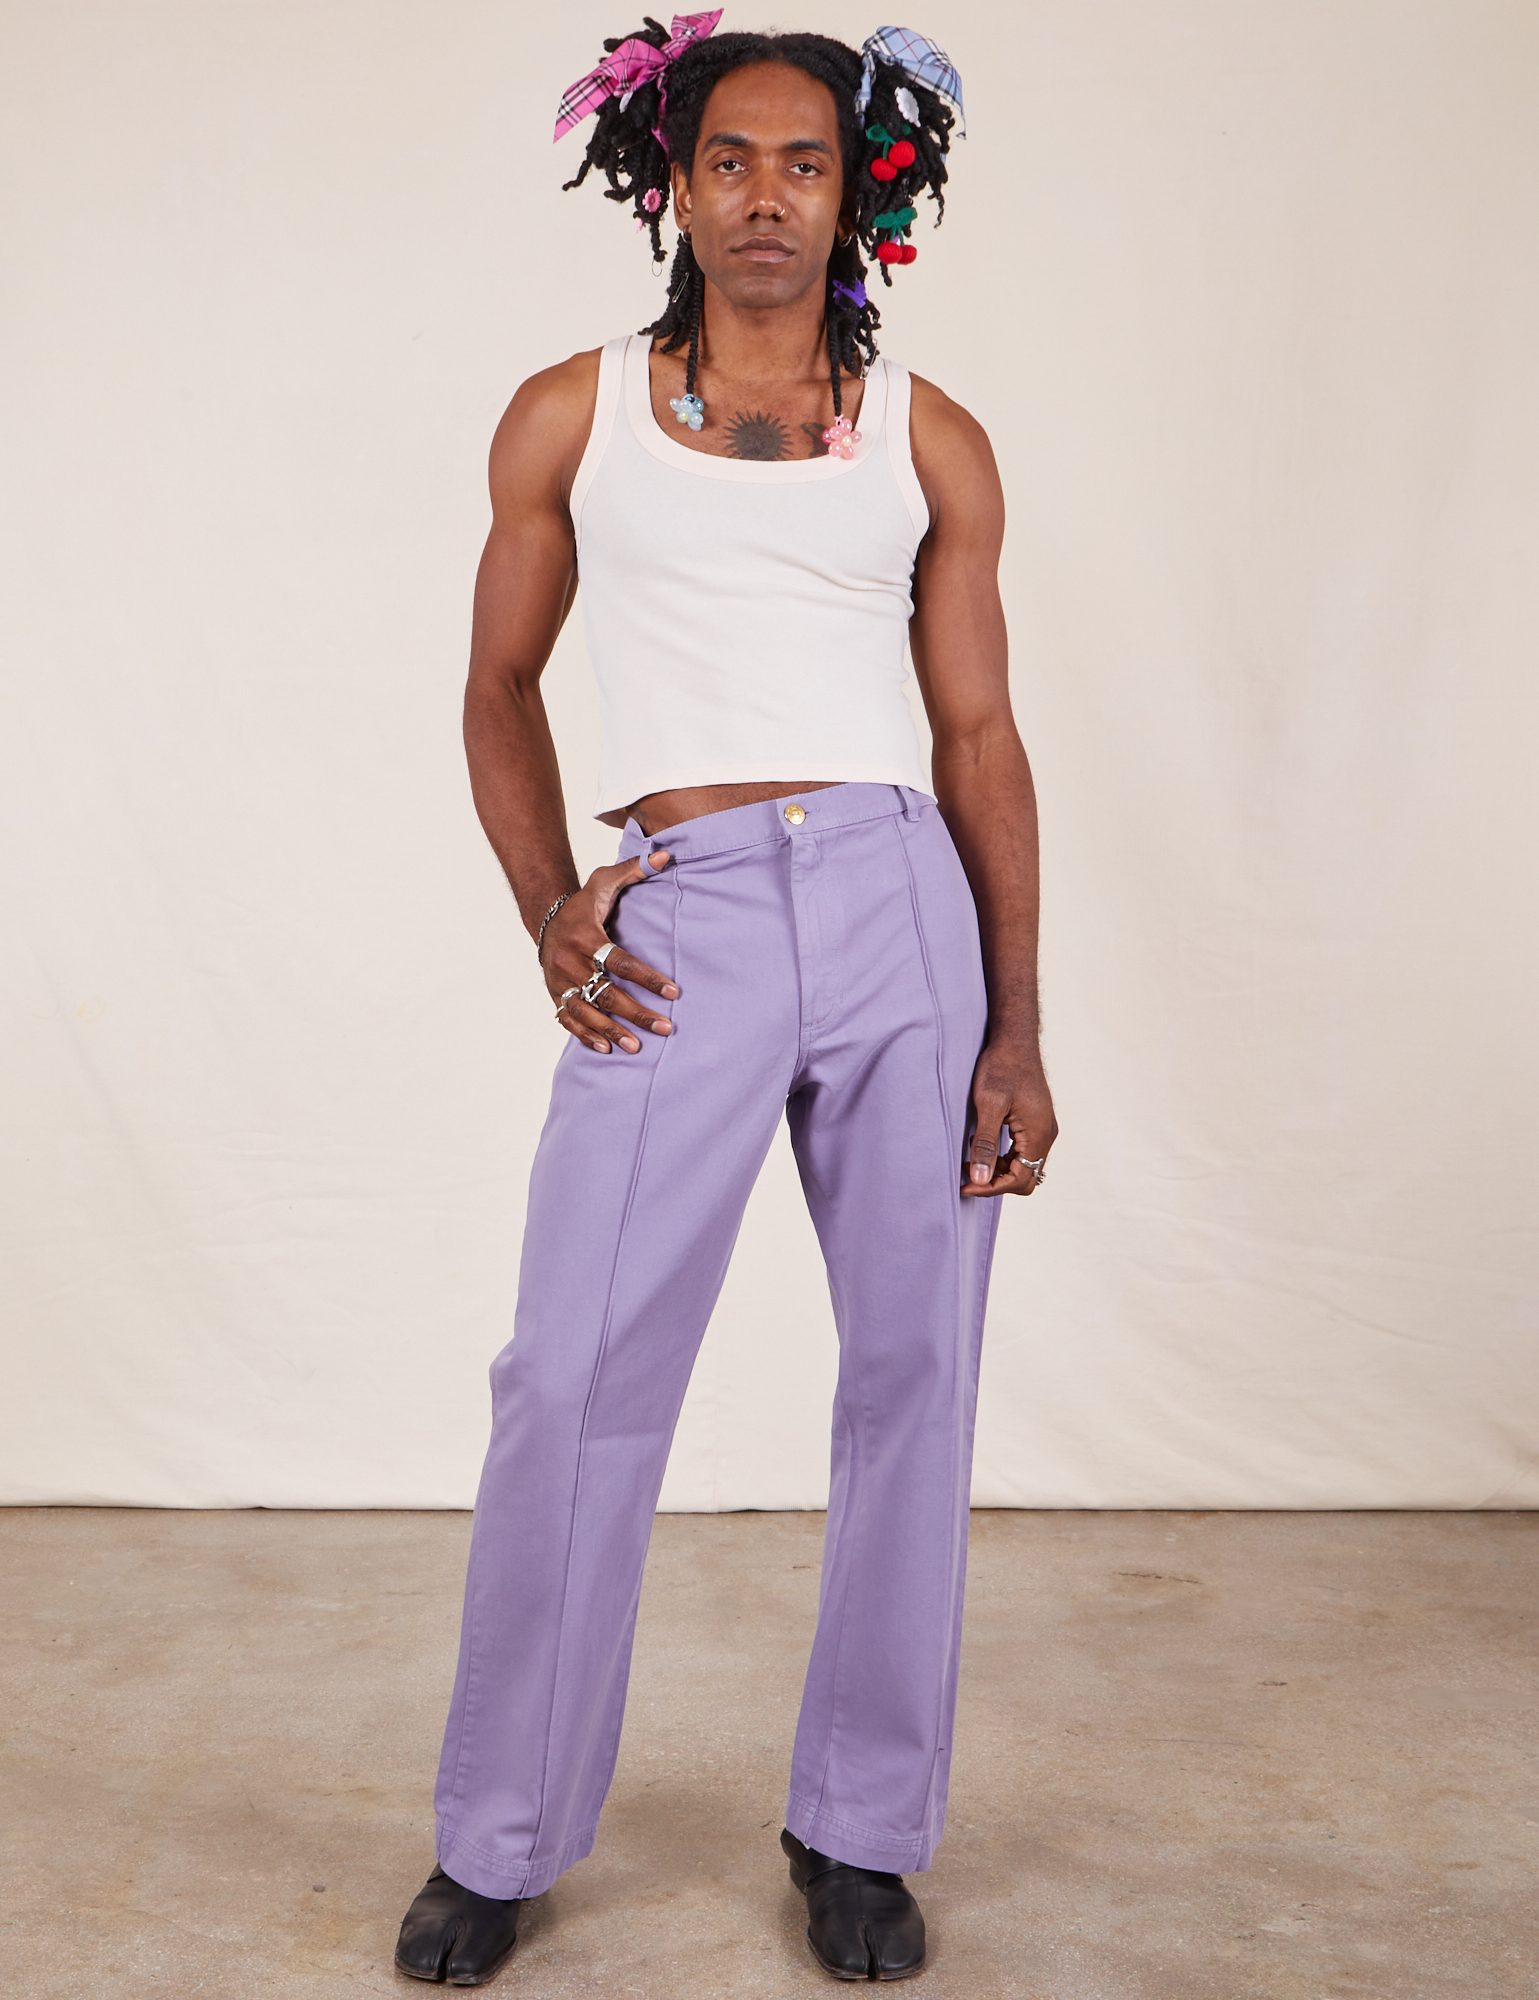 Jerrod is 6&#39;3&quot; and wearing M Long Western Pants in Faded Grape paired with vintage off-white Tank Top